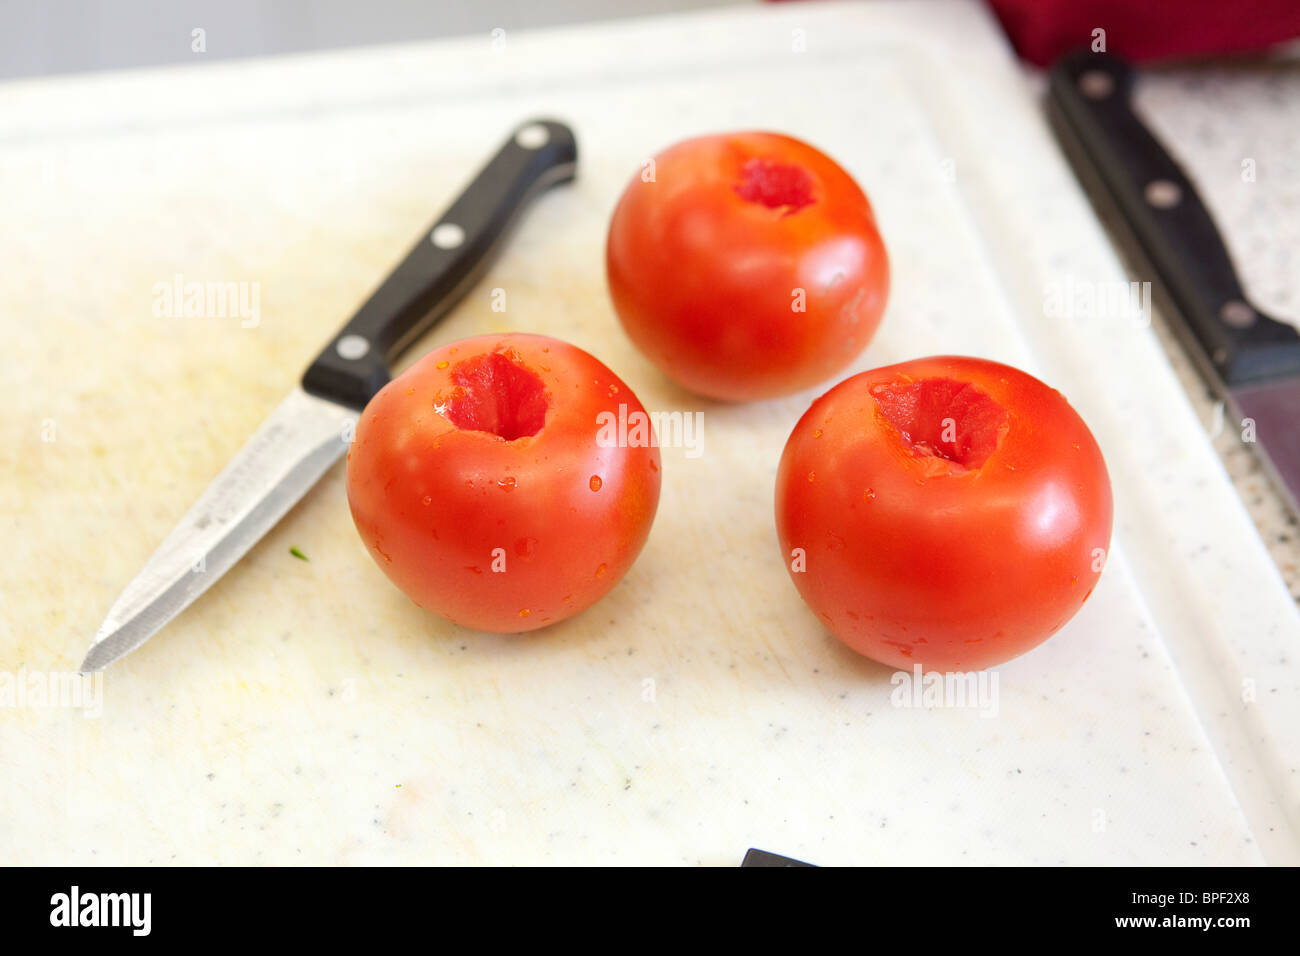 tomatoes prepared for a meal Stock Photo